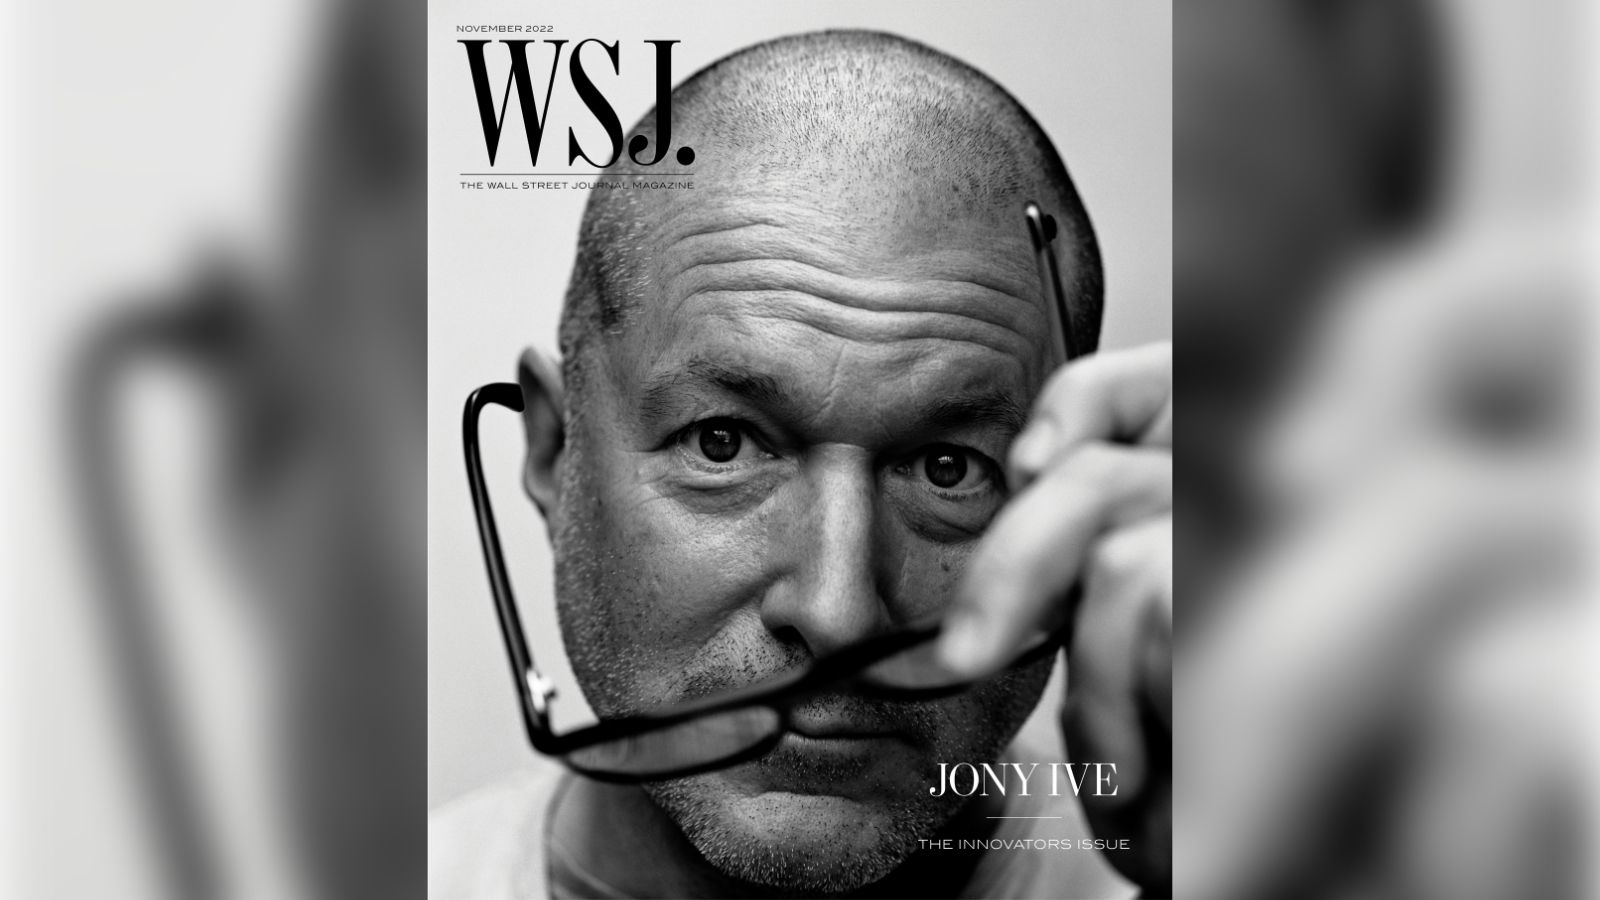 Jony Ive Featured on WSJ. Magazine Cover, Talks Work at Apple and